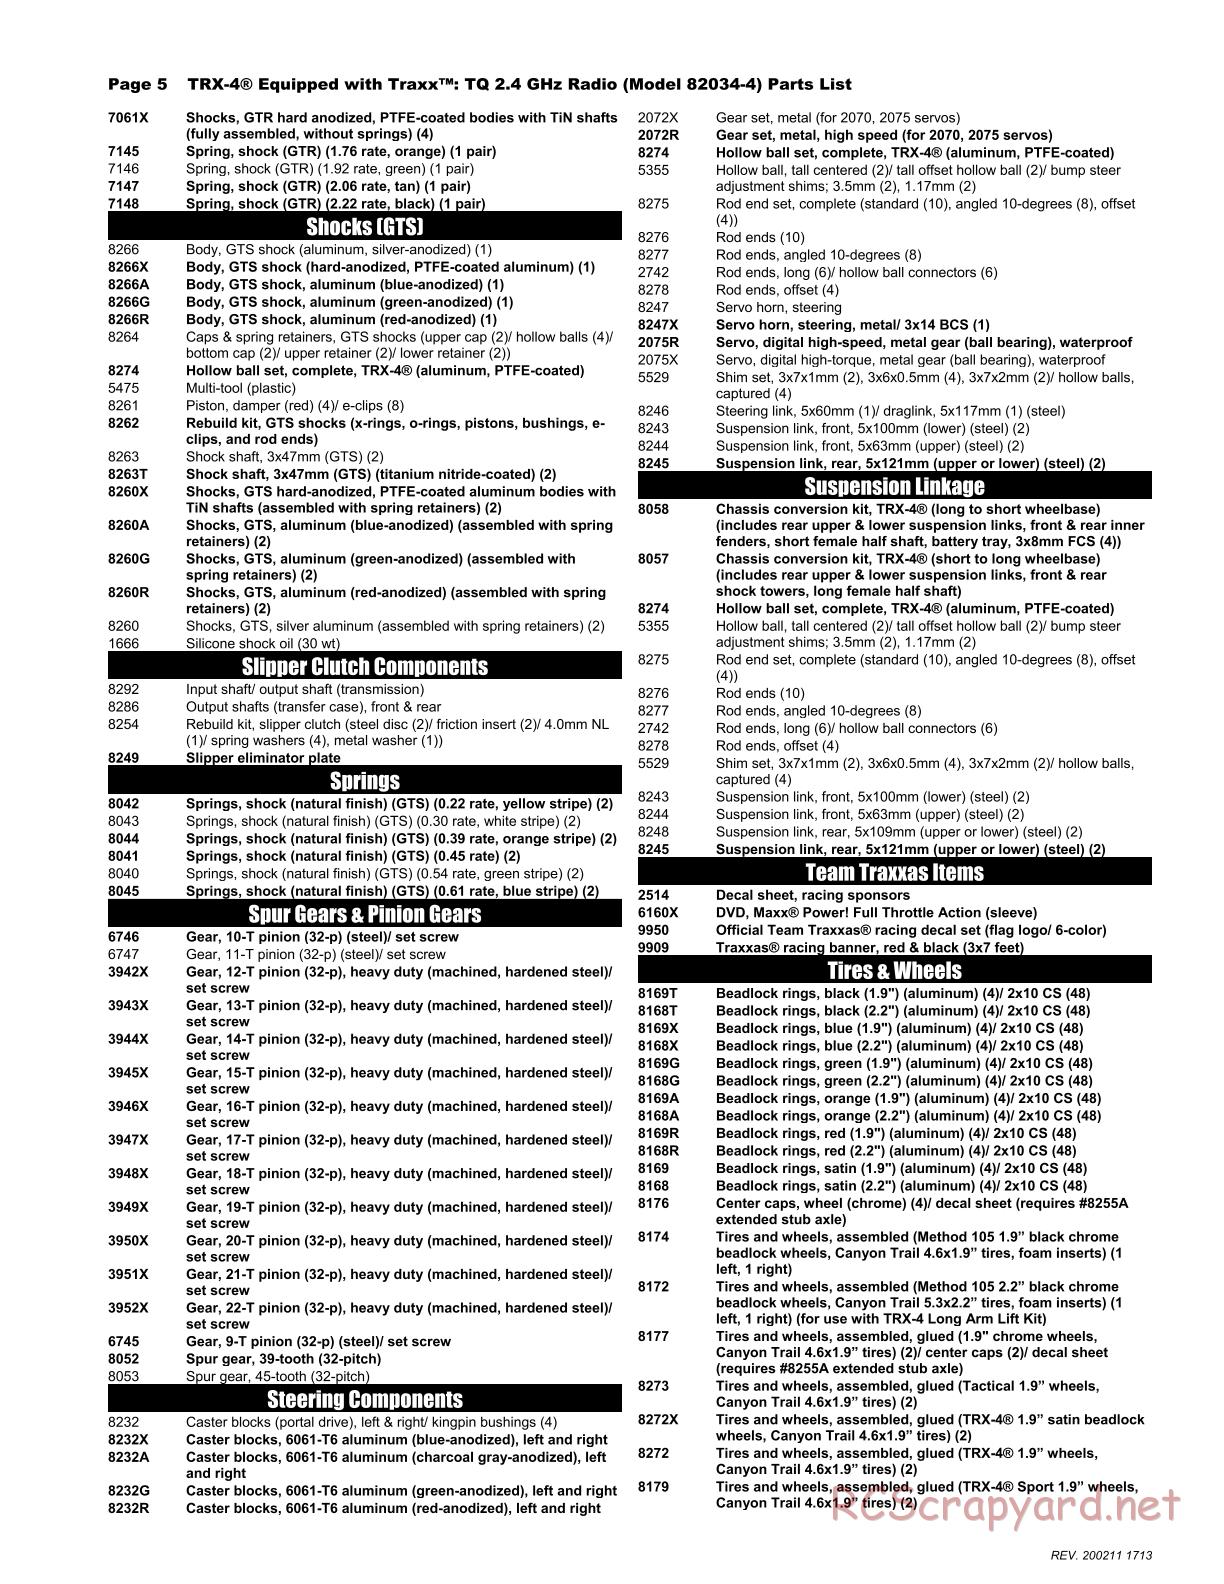 Traxxas - TRX-4 Equipped with Traxx - Parts List - Page 5